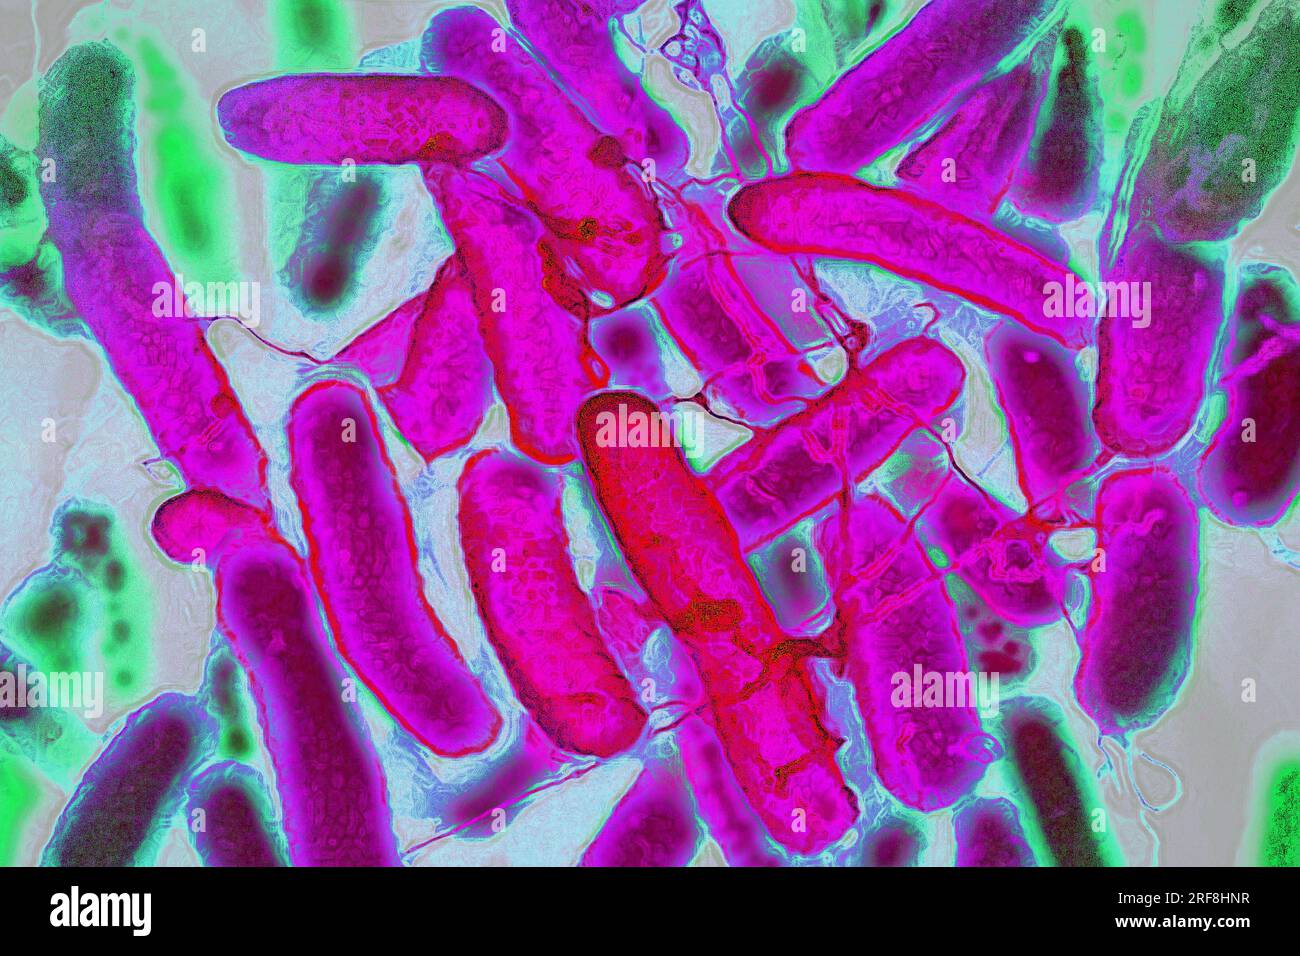 Escherichia coli (intestinal bacteria that resides in the digestive tract of humans and warm-blooded animals, it is the cause of food poisoning. Stock Photo